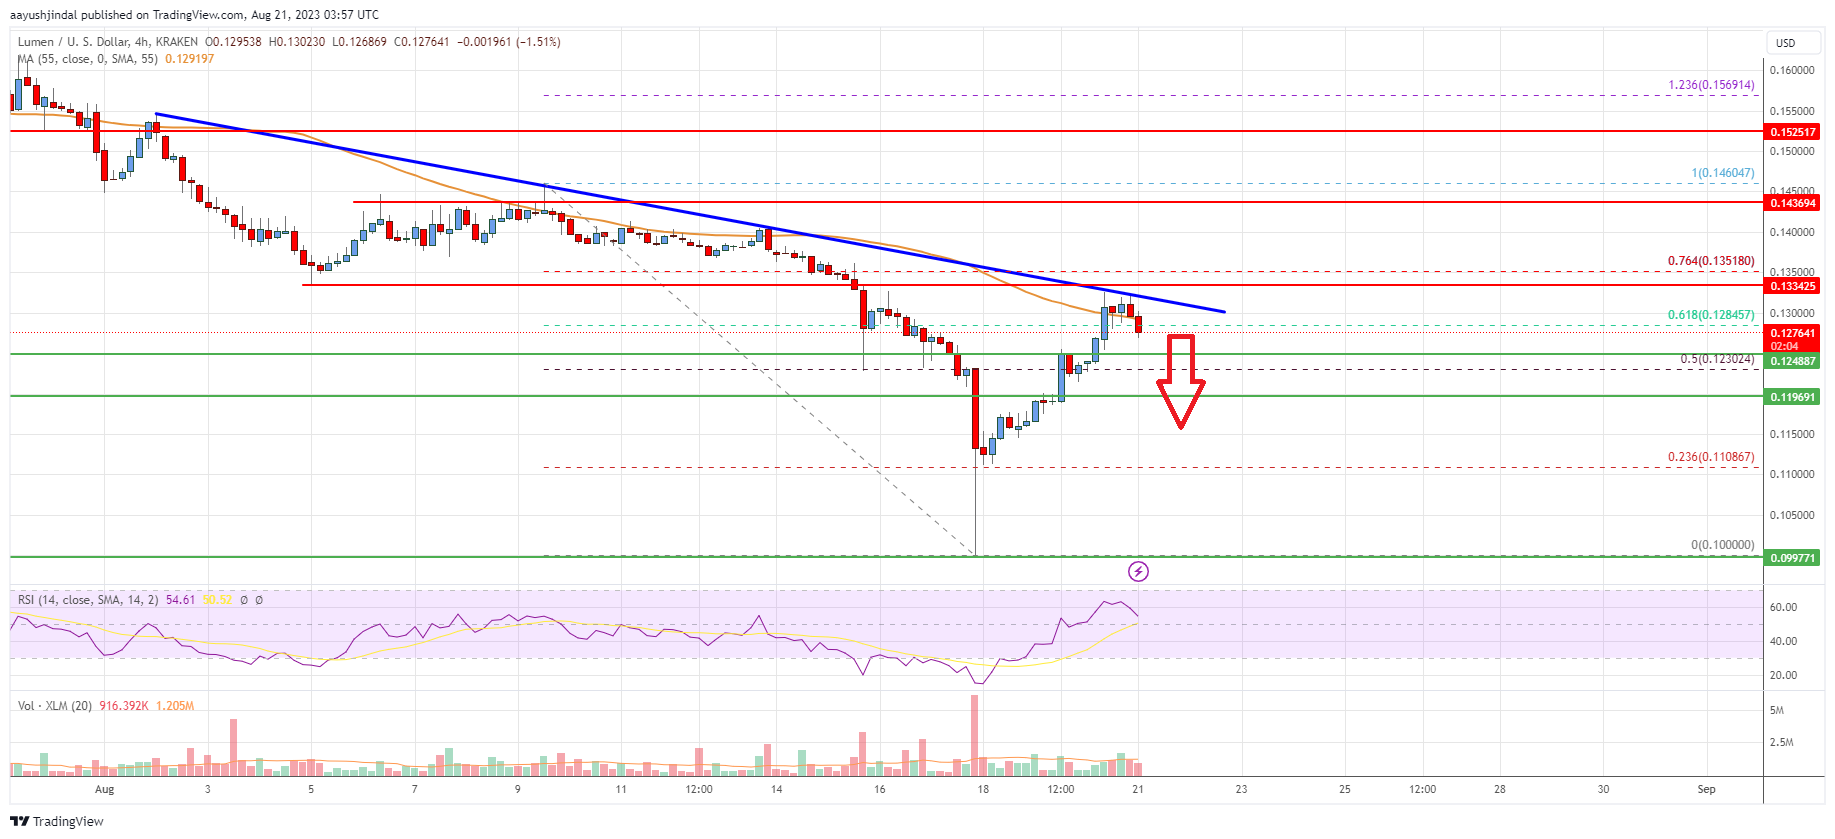 Stellar Lumen (XLM) Price Could Fail To Recover Above $0.135